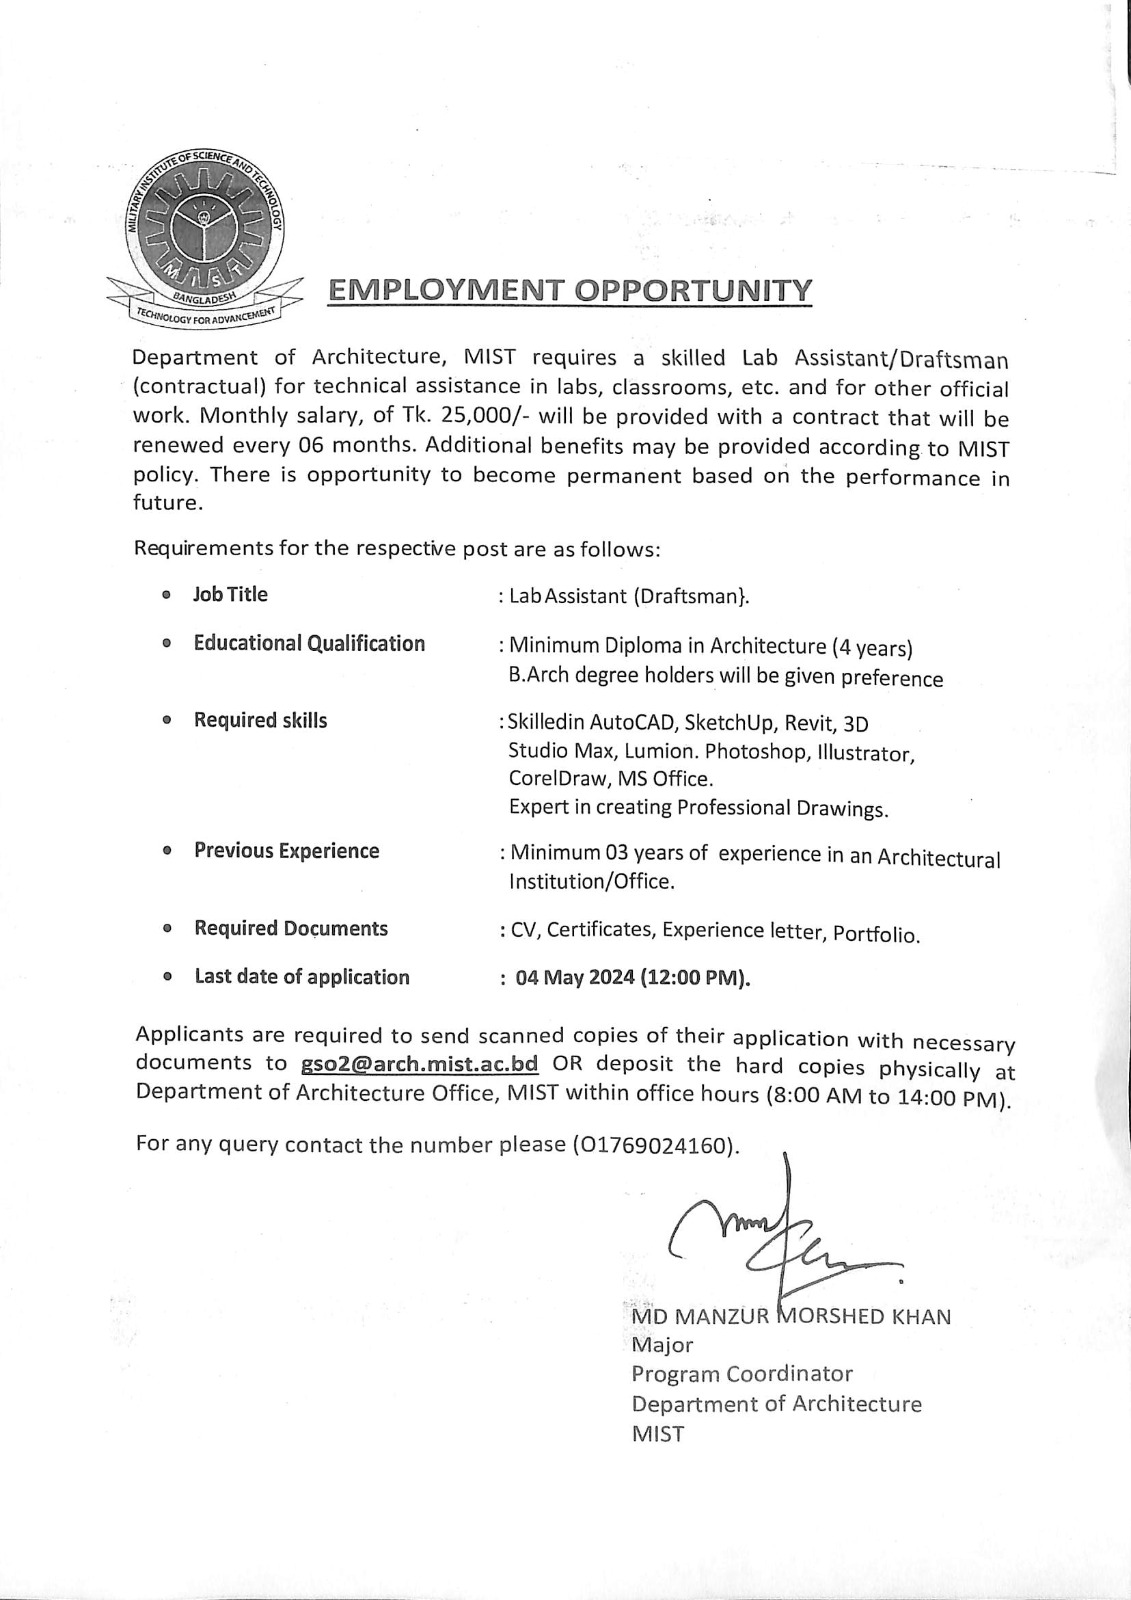 EMPLOYMENT OPPORTUNITY IN THE DEPARTMENT OF ARCHITECTURE